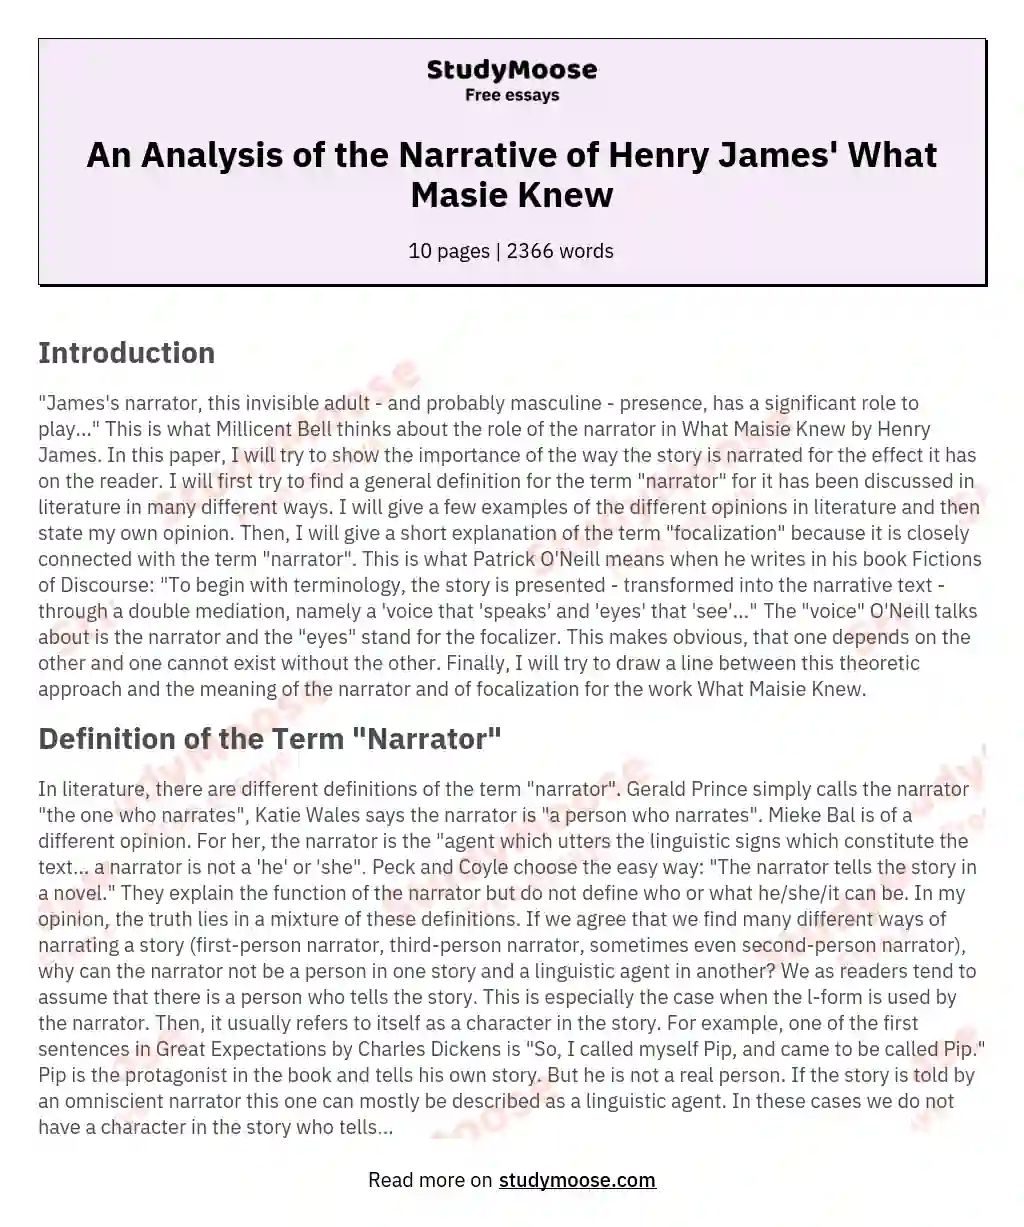 An Analysis of the Narrative of Henry James' What Masie Knew